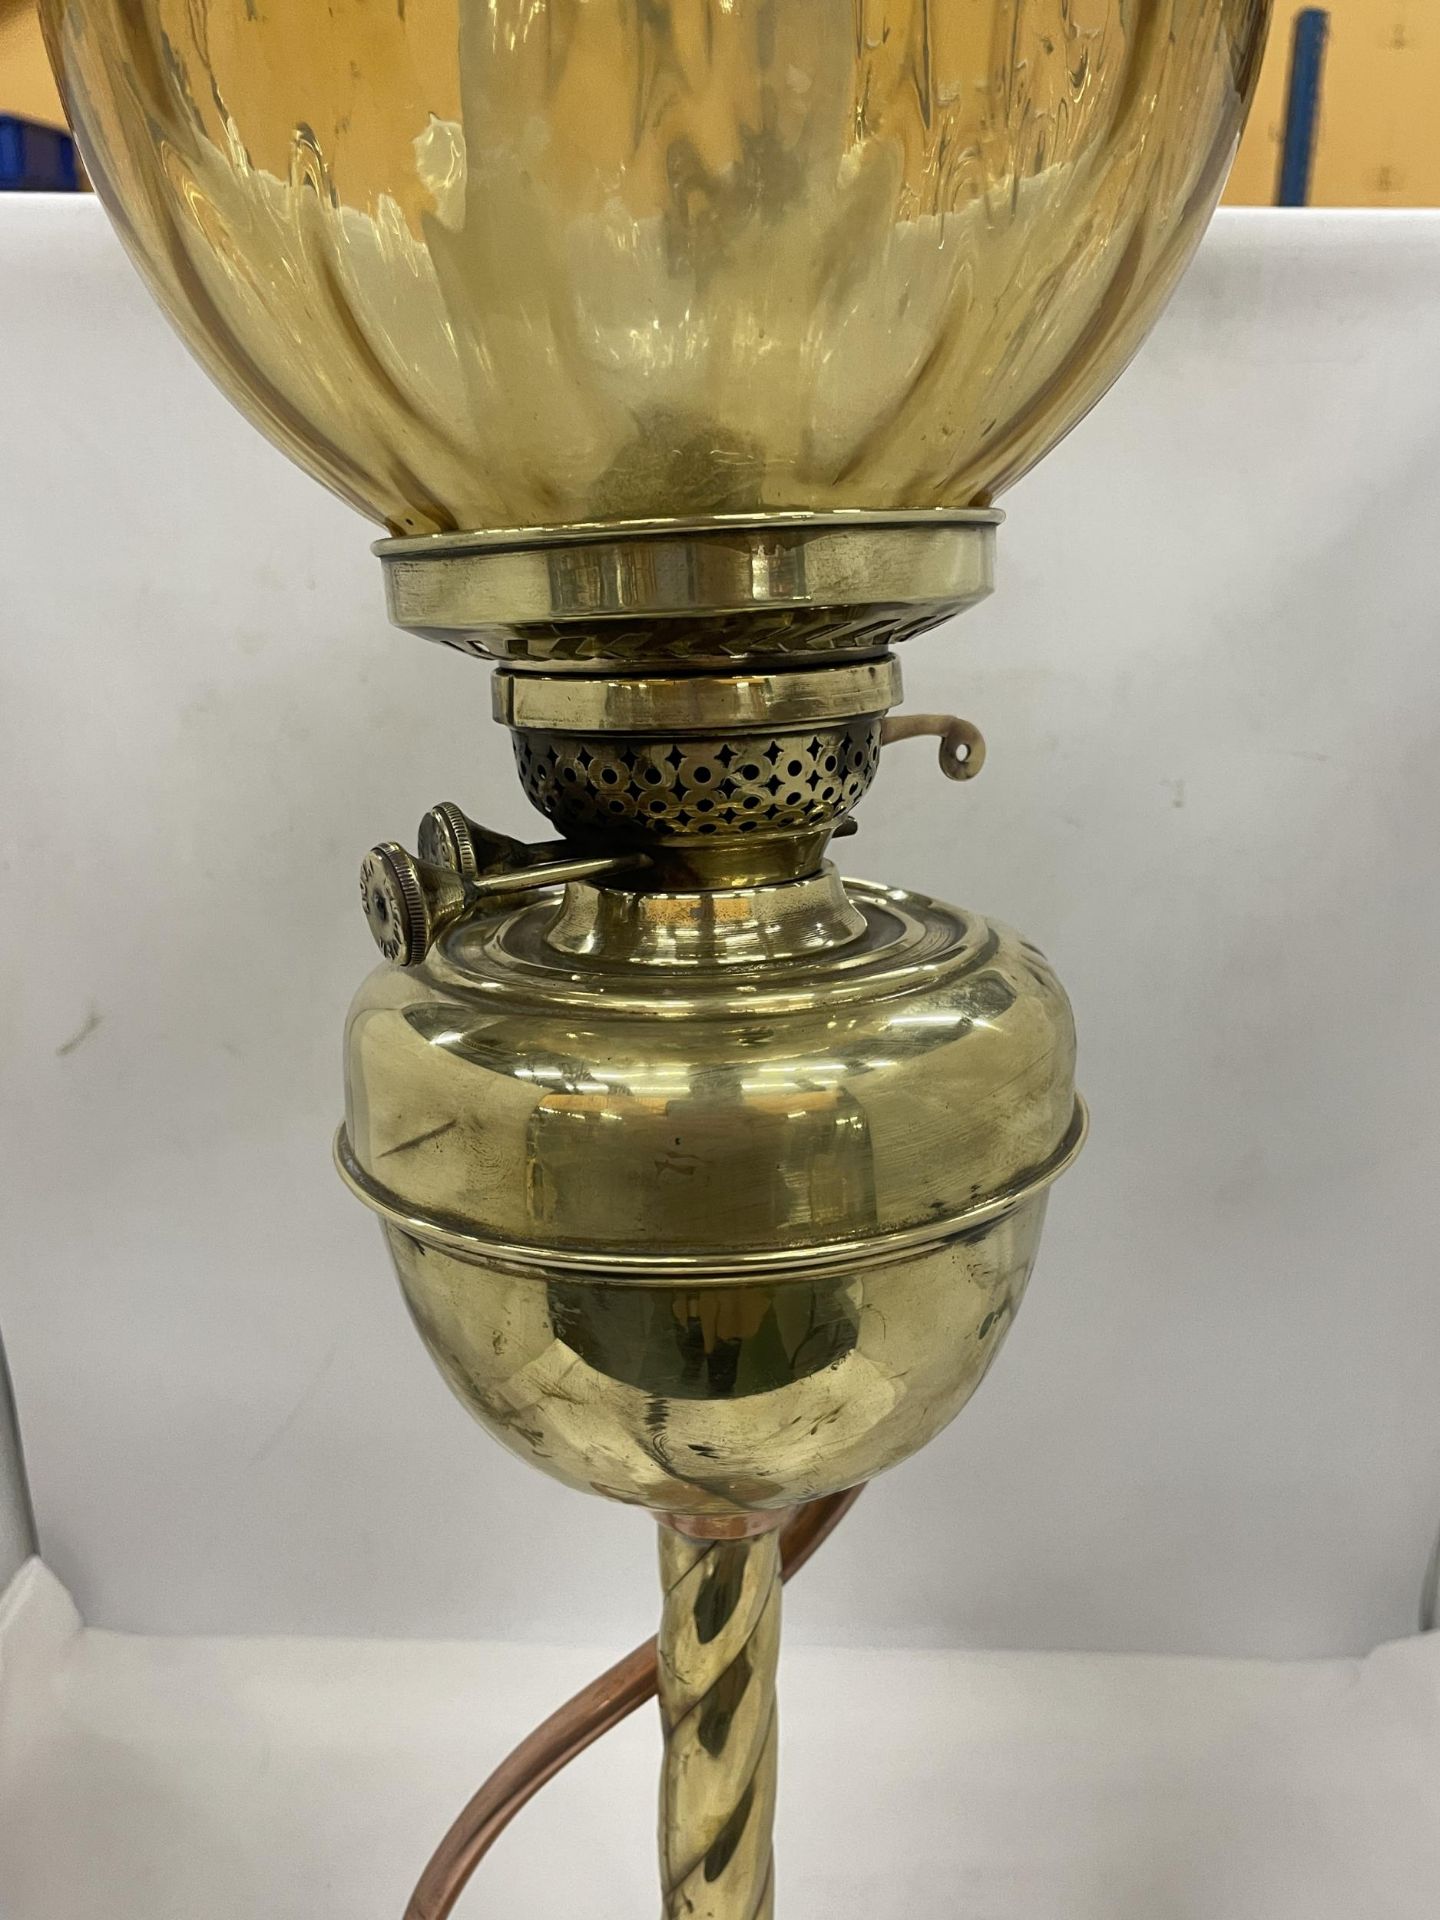 A VINTAGE OIL LAMP WITH MABER COLOURED GLASS SHADE, GLASS FUNNEL AND A BRASS AND COPPER TWISTED BASE - Image 3 of 4